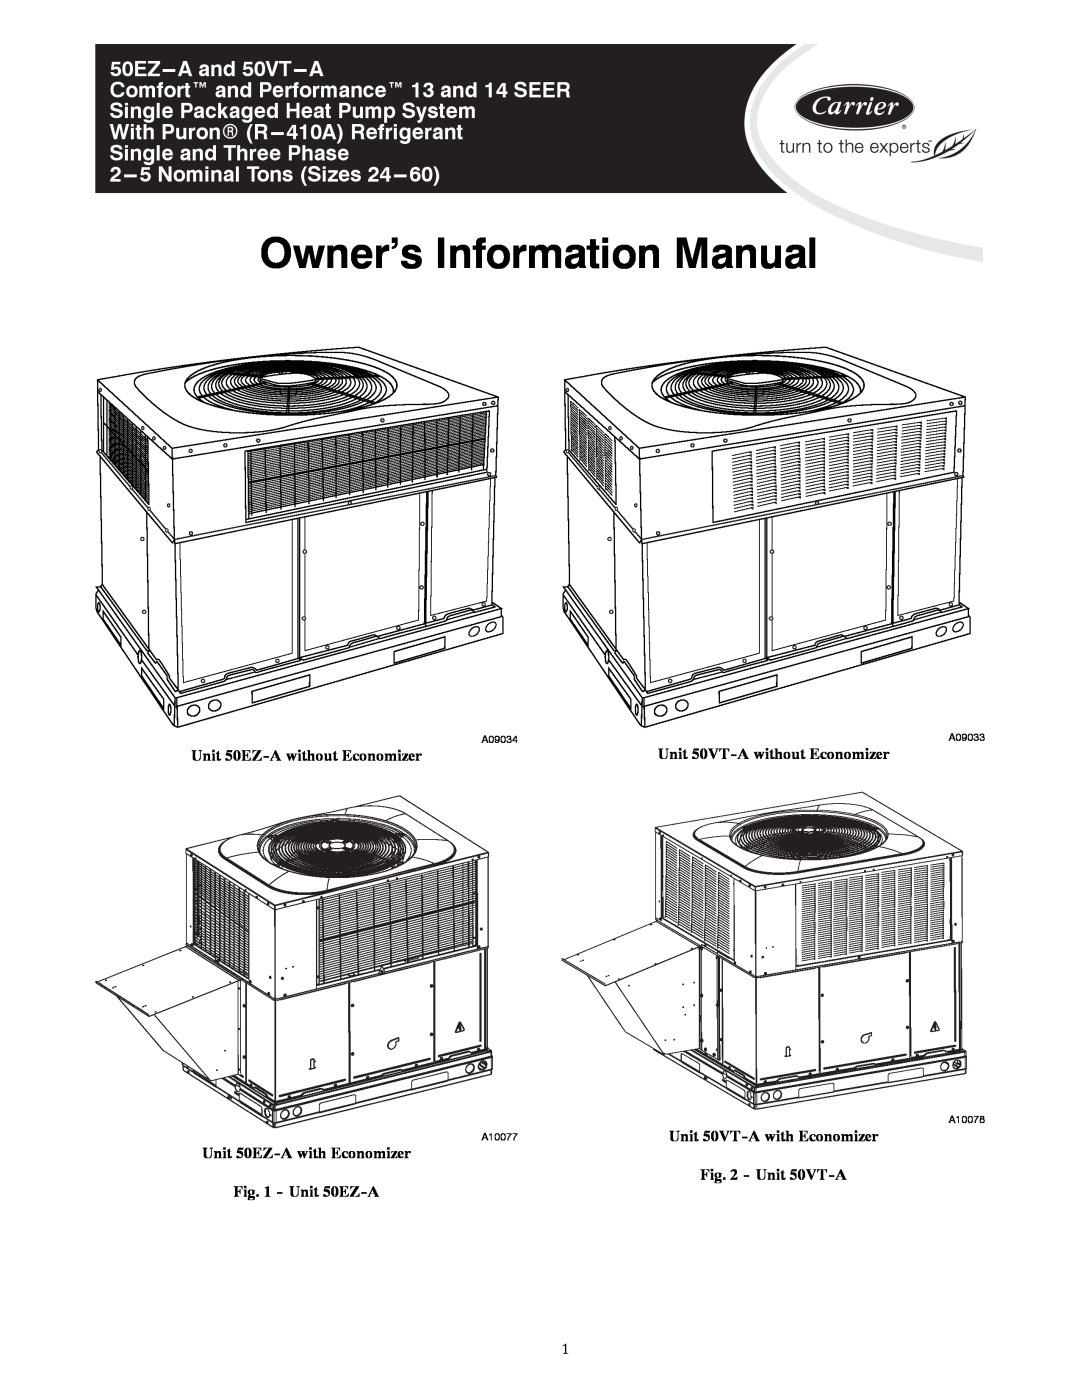 Carrier 50EZ-A manual Owner’s Information Manual, 50EZ---Aand 50VT---A, Comfort and Performance 13 and 14 SEER, A09034 